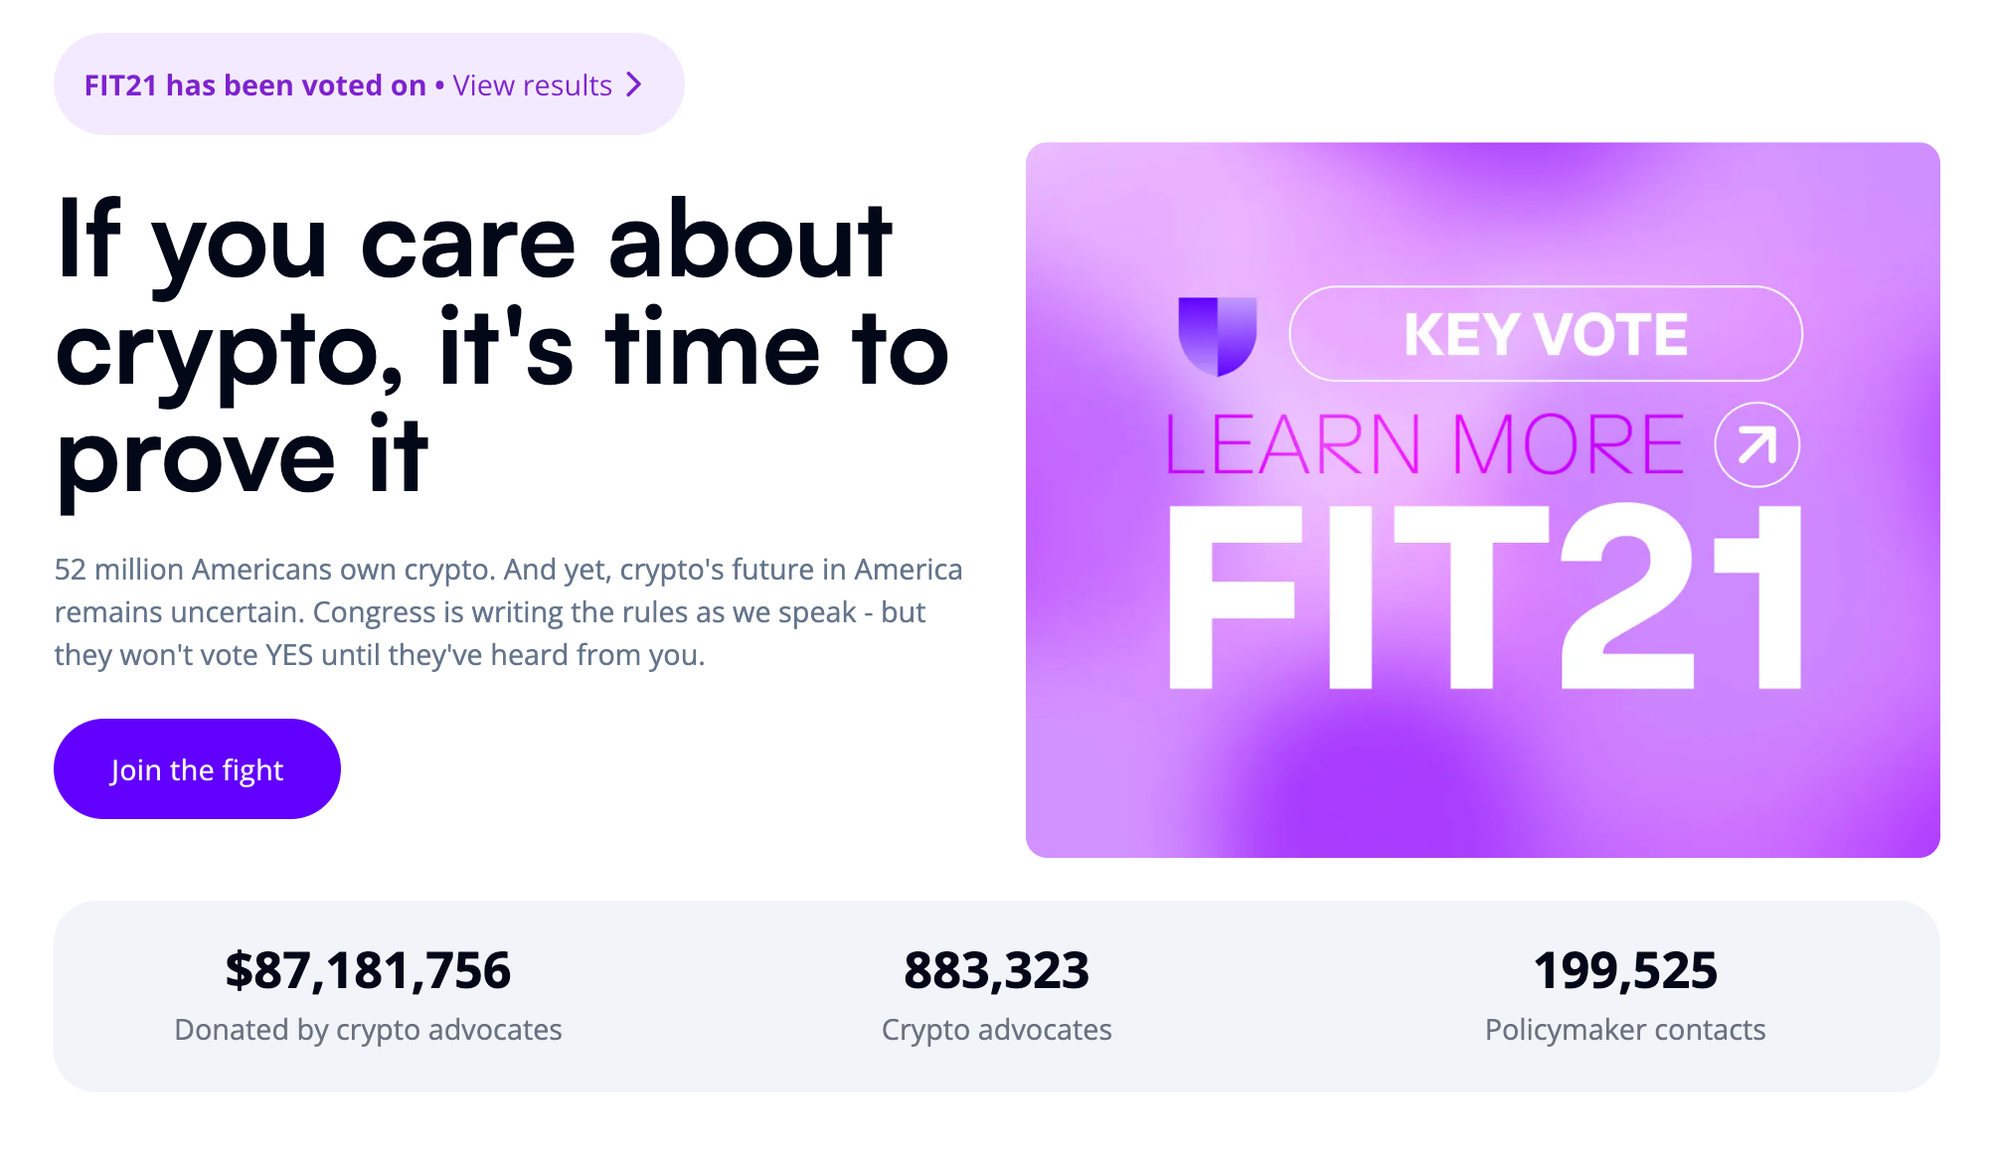 If you care about crypto, it's time to prove it 52 million Americans own crypto. And yet, crypto's future in America remains uncertain. Congress is writing the rules as we speak - but they won't vote YES until they've heard from you. / Join the fight /  $87,181,756 donated by crypto advocates / 883,323 crypto advocates / 199,525 policymaker contacts